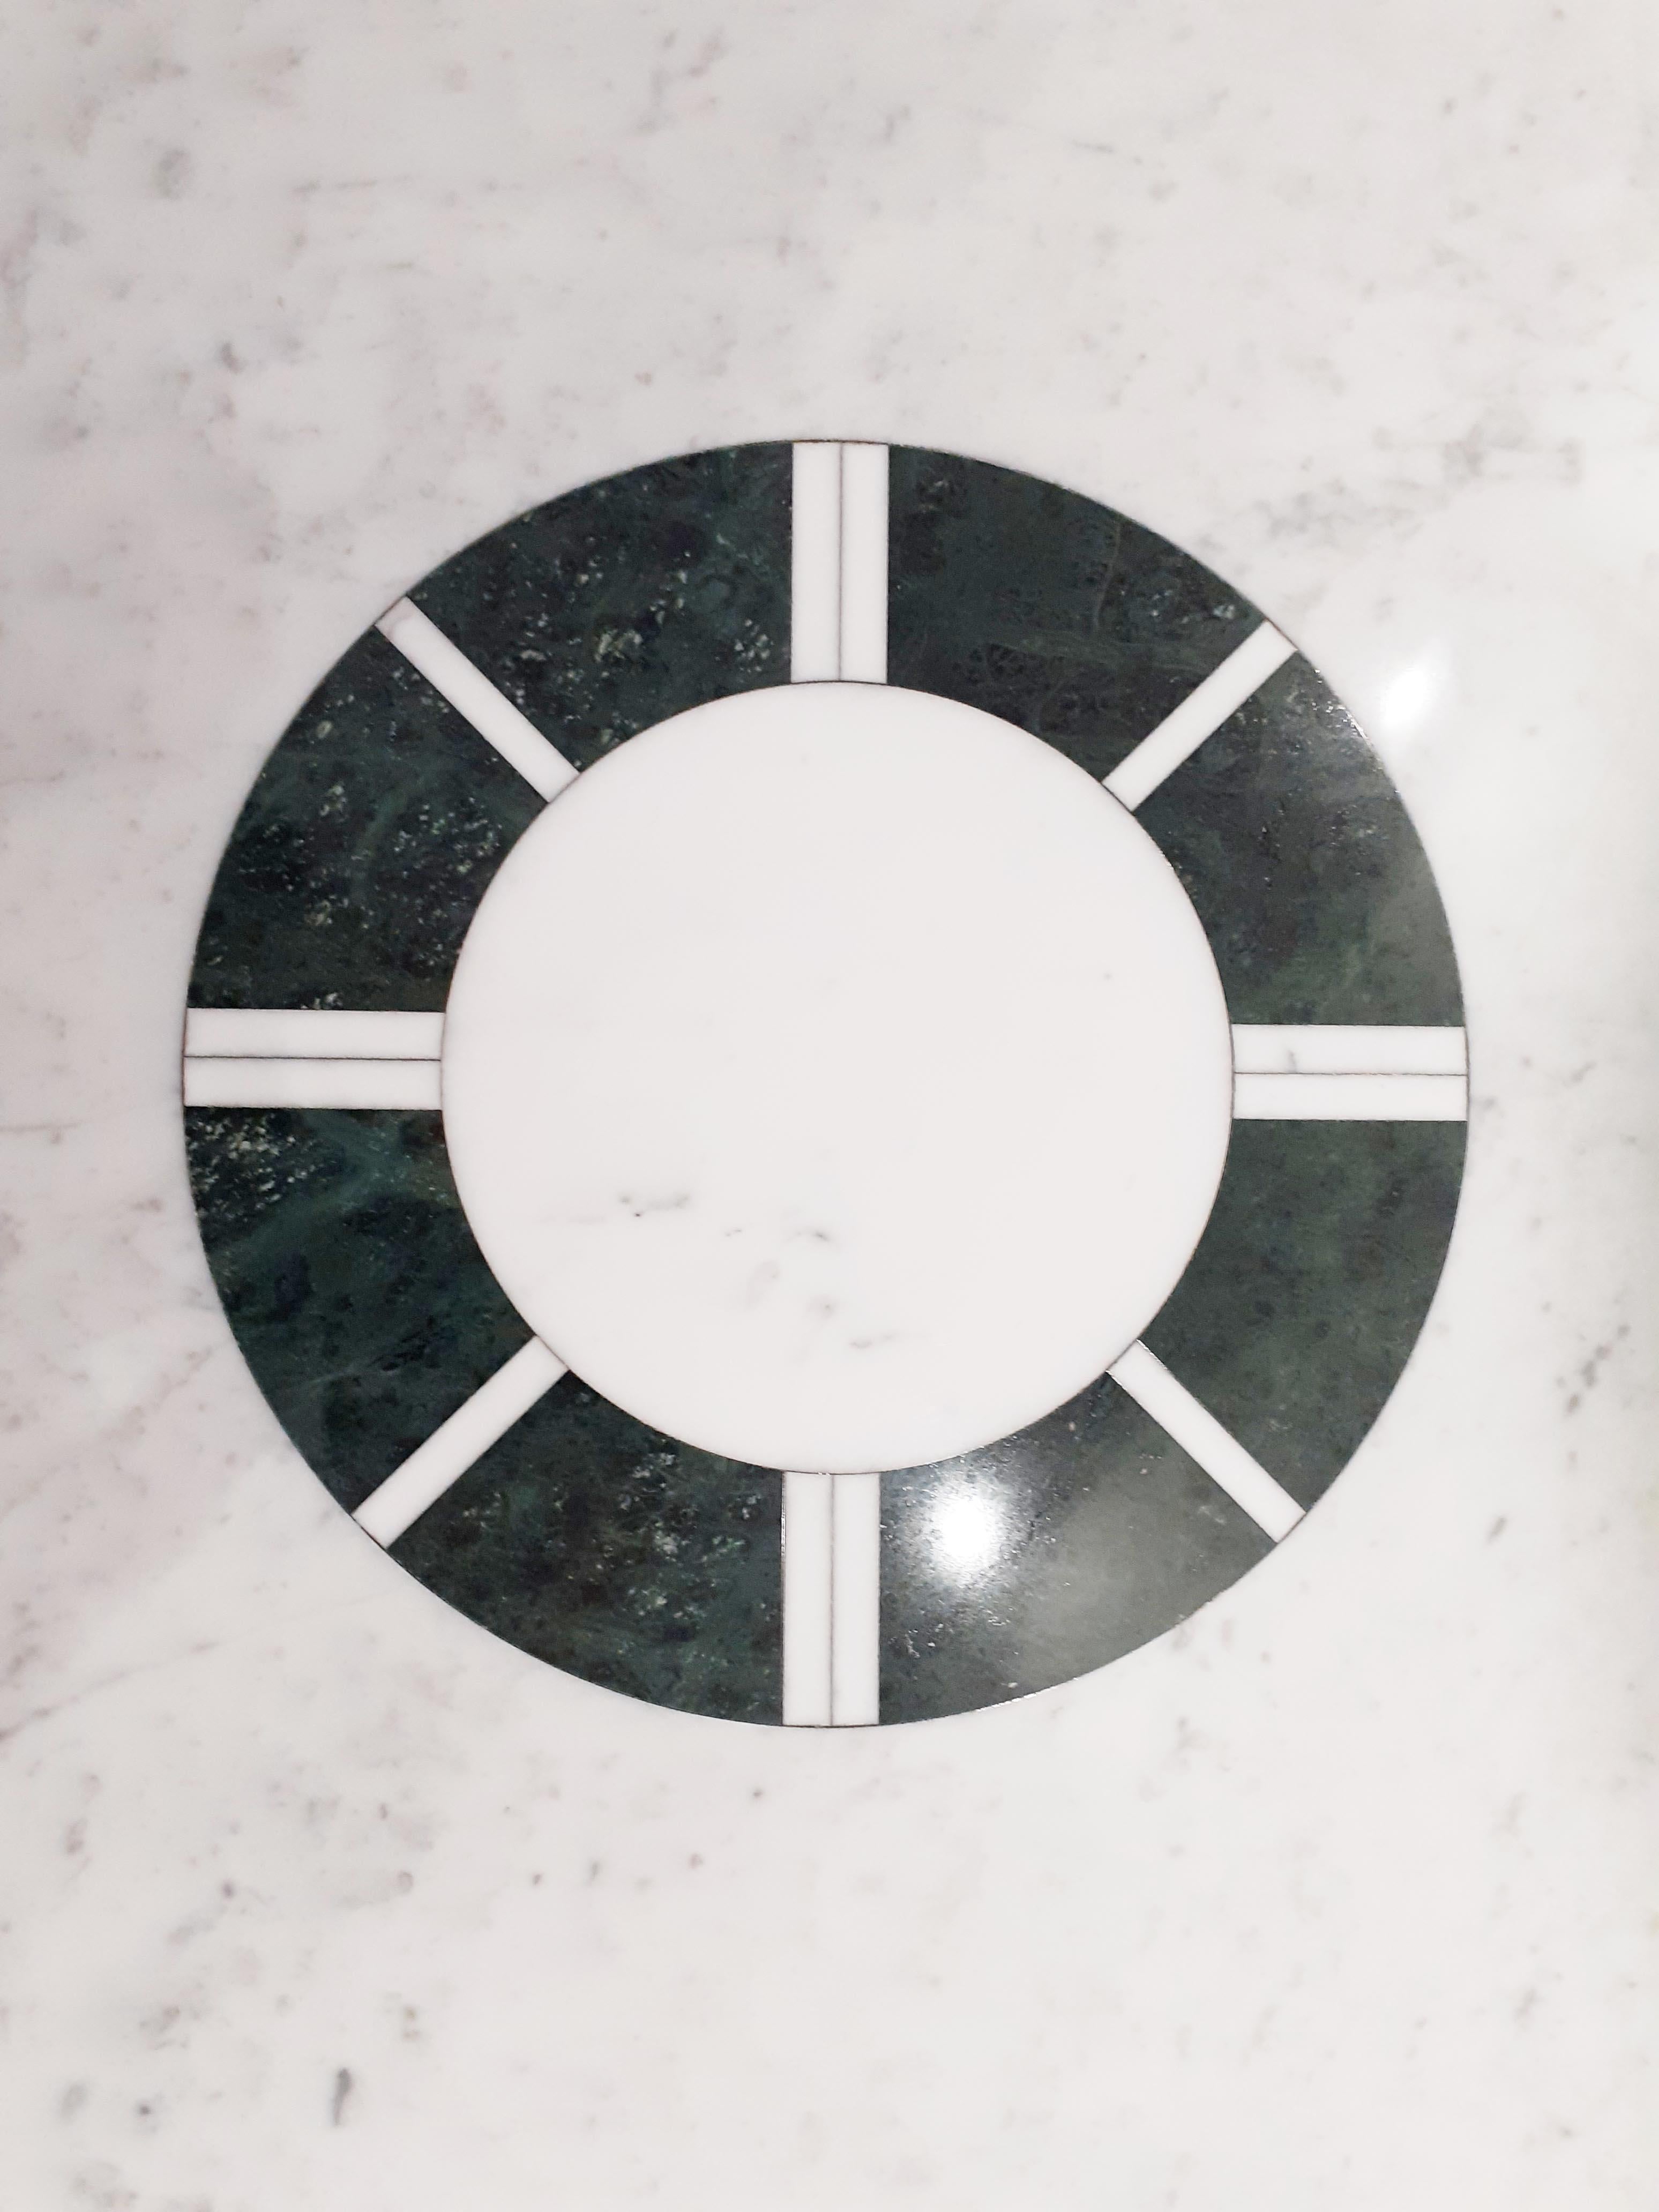 21st Century by Adolfo Natalini Sole e Luna Inlaid Marble Table White and Green In New Condition For Sale In massa, IT